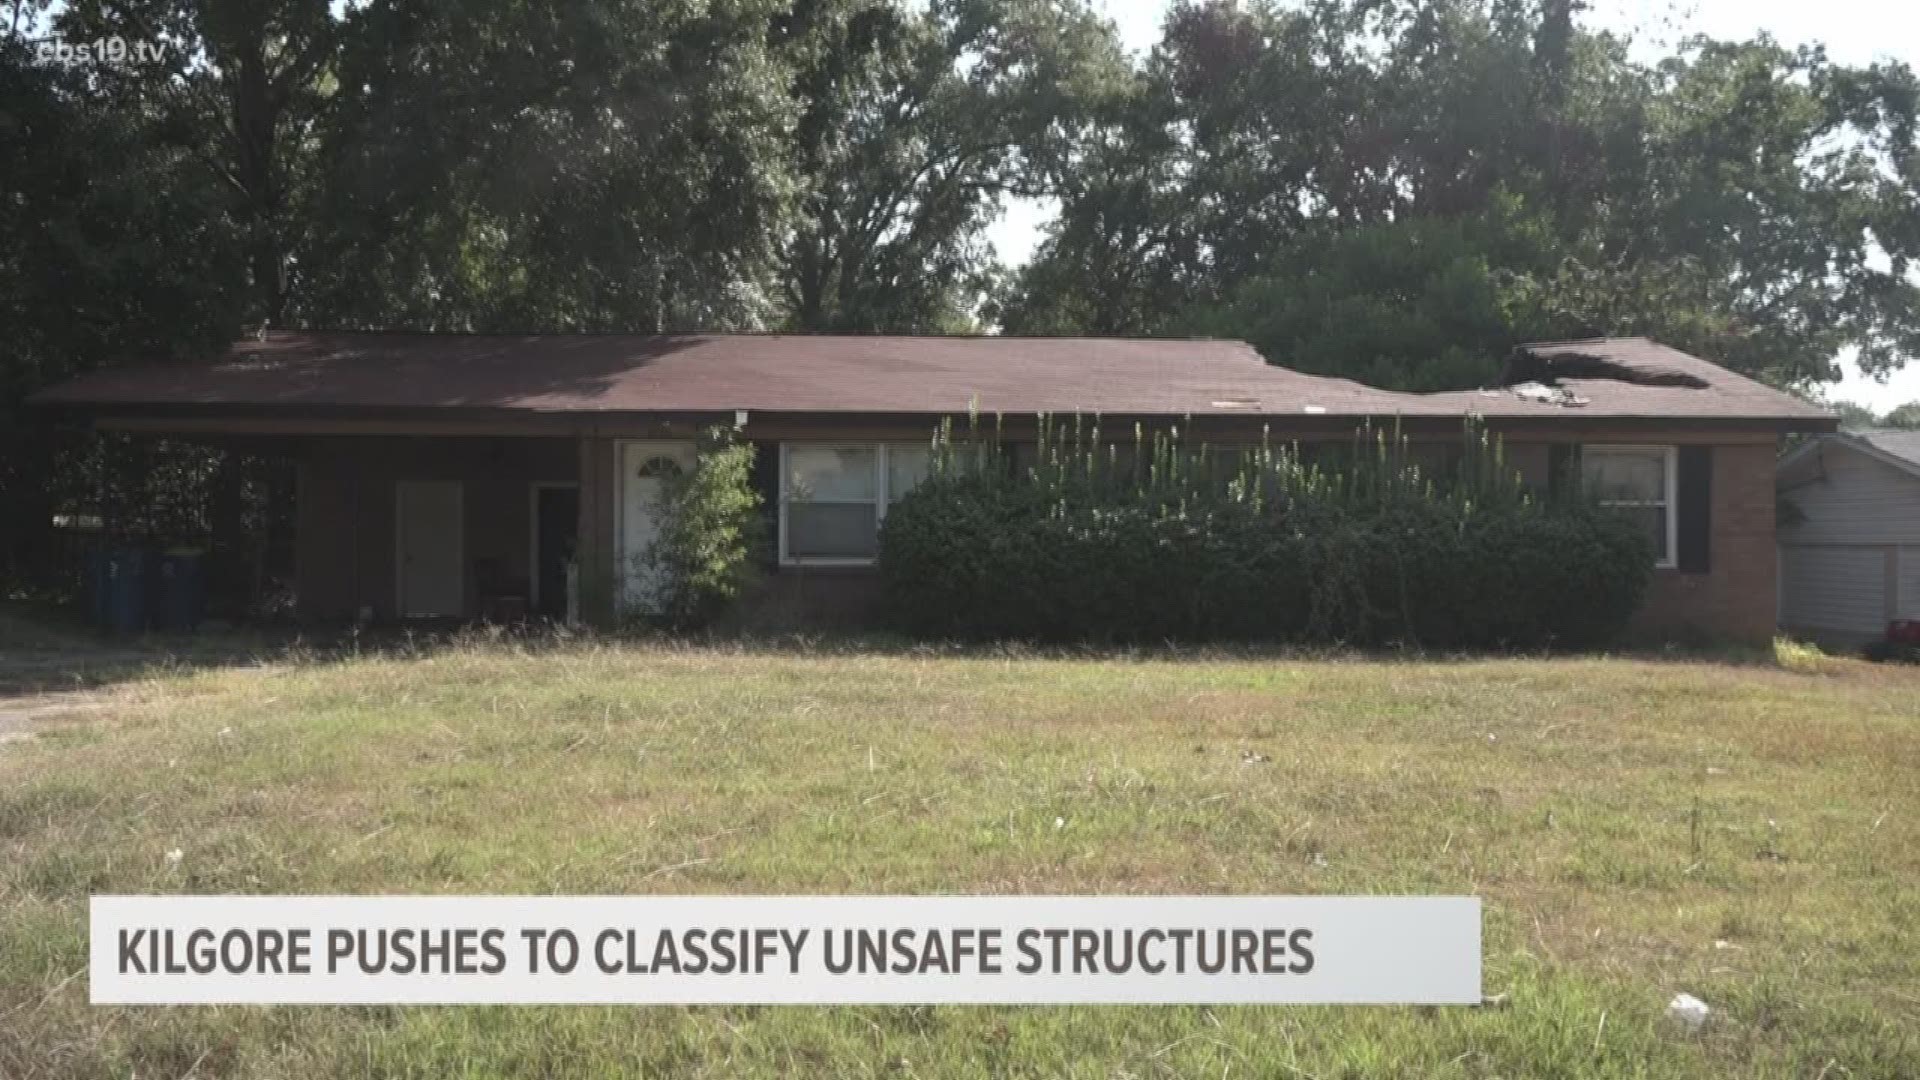 The City of Kilgore is pushing to classify unsafe structures that can cause potential harm to residents.